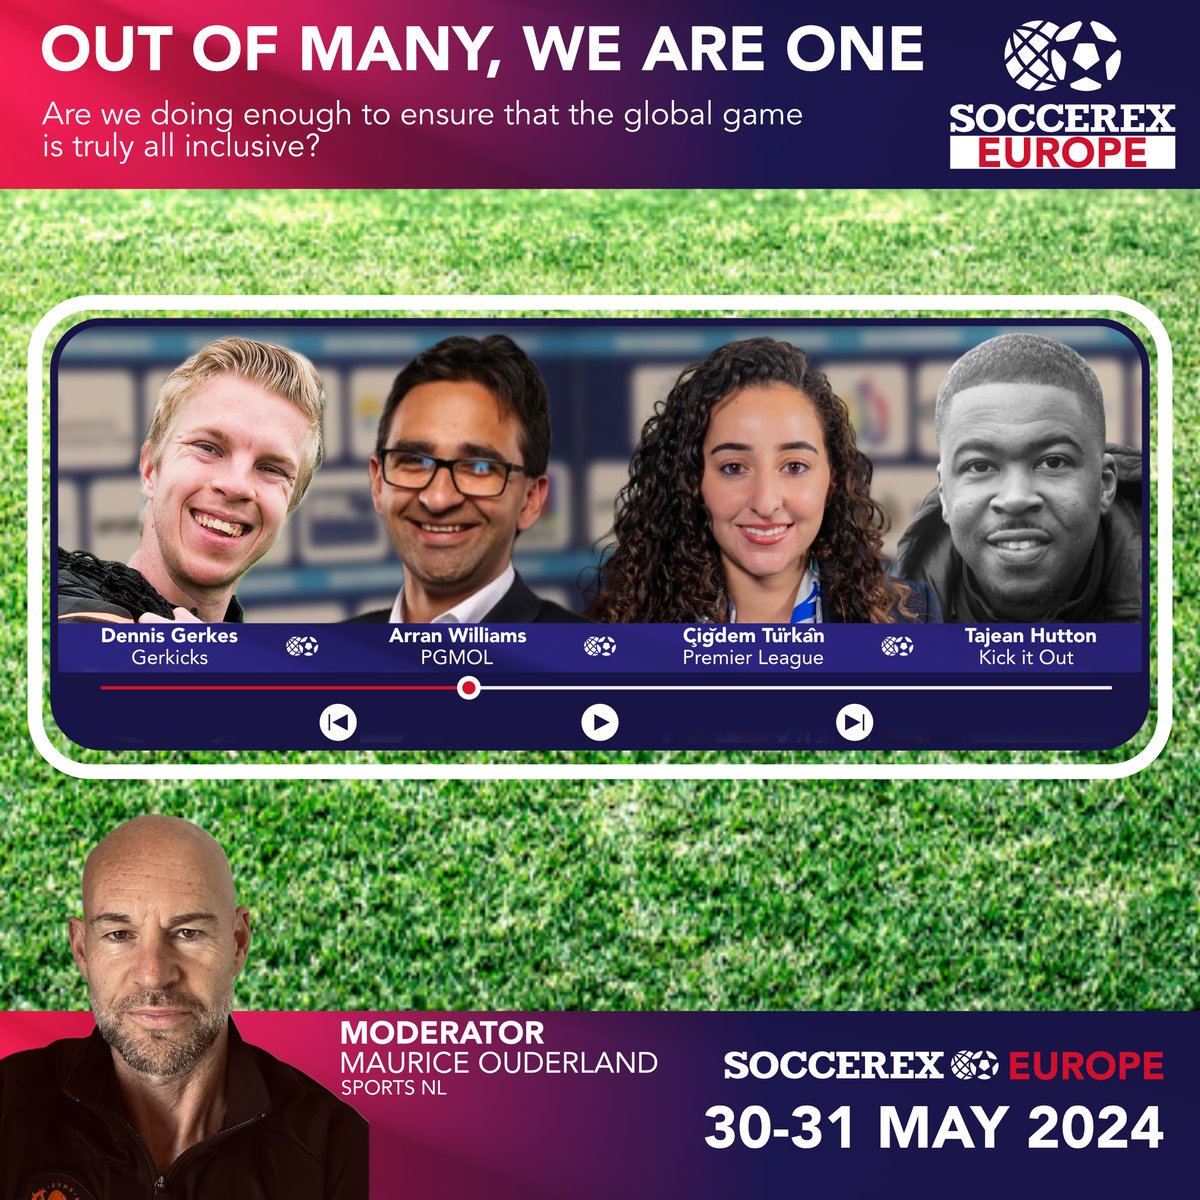 Out of many, we are one ⚽️💥 Join us at #soccerexeurope for a discussion on inclusion in football at the iconic @cruijffarena, this May 30th - 31st! Panellists include: 🗣️ Dennis Gerkes 🗣️ Arran Williams 🗣️ @CigdemTurkanHMT 🗣️ @TTHutton_ 🎙️ Moderated by Maurice Ouderland